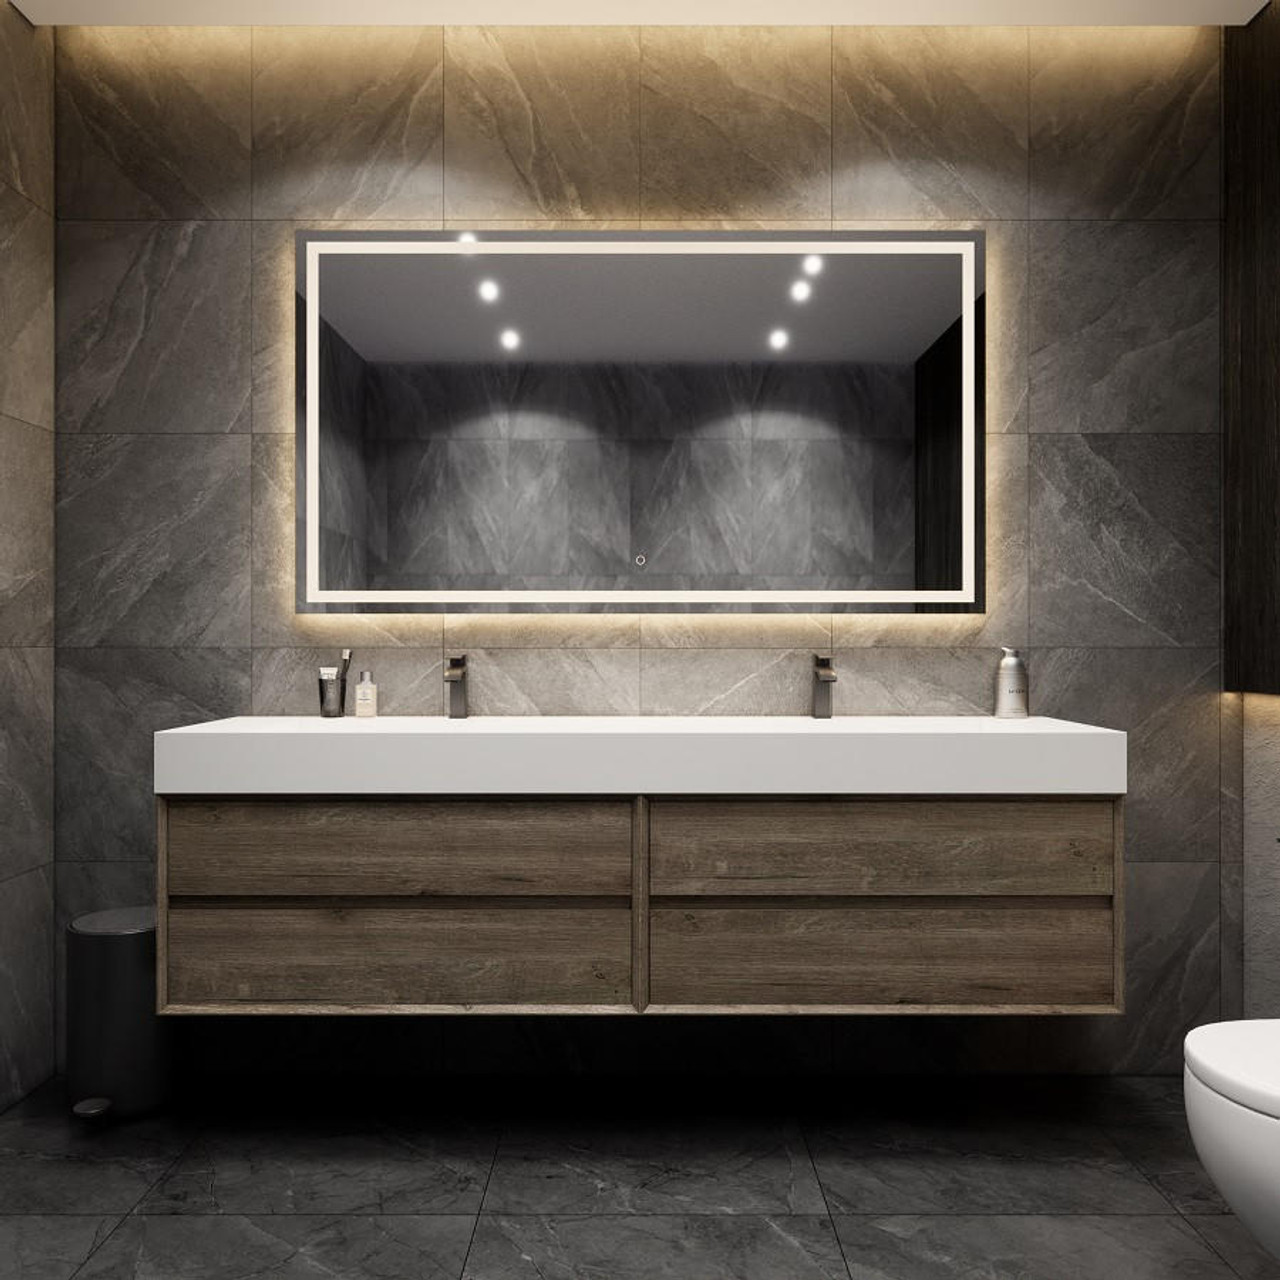 https://cdn11.bigcommerce.com/s-qgdlnuy6t7/images/stencil/1280x1280/products/1375/12904/max16-max-84-wall-mounted-bath-vanity-with-16-acrylic-sinkdouble-faucet-holes__64521.1692910848.jpg?c=2